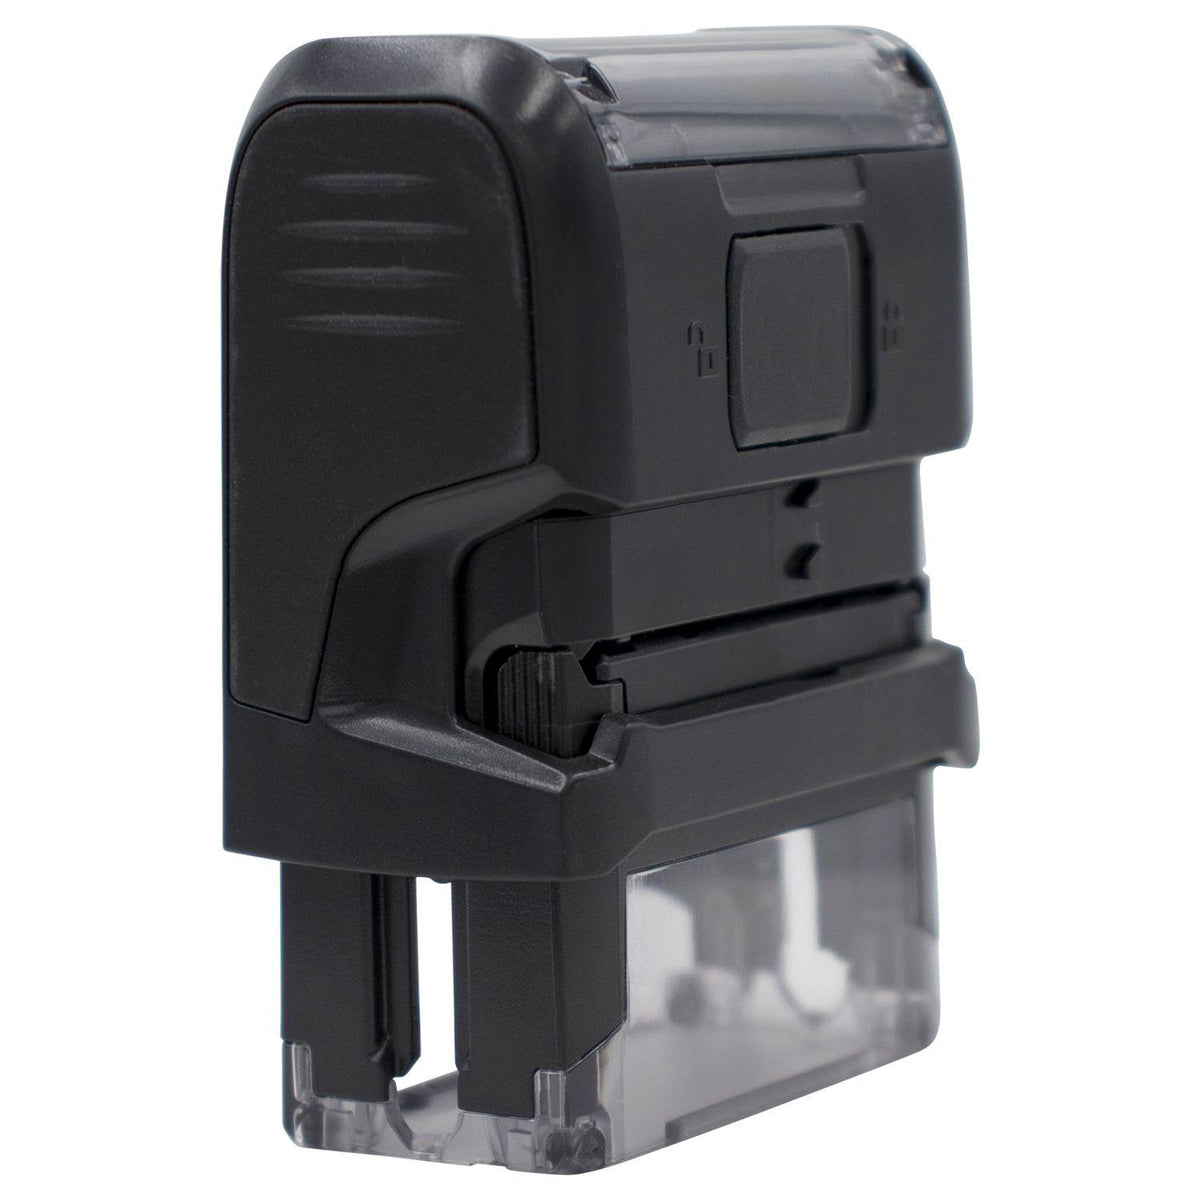 Large Self-Inking Pagado Stamp - Engineer Seal Stamps - Brand_Trodat, Impression Size_Large, Stamp Type_Self-Inking Stamp, Type of Use_Business, Type of Use_General, Type of Use_Office